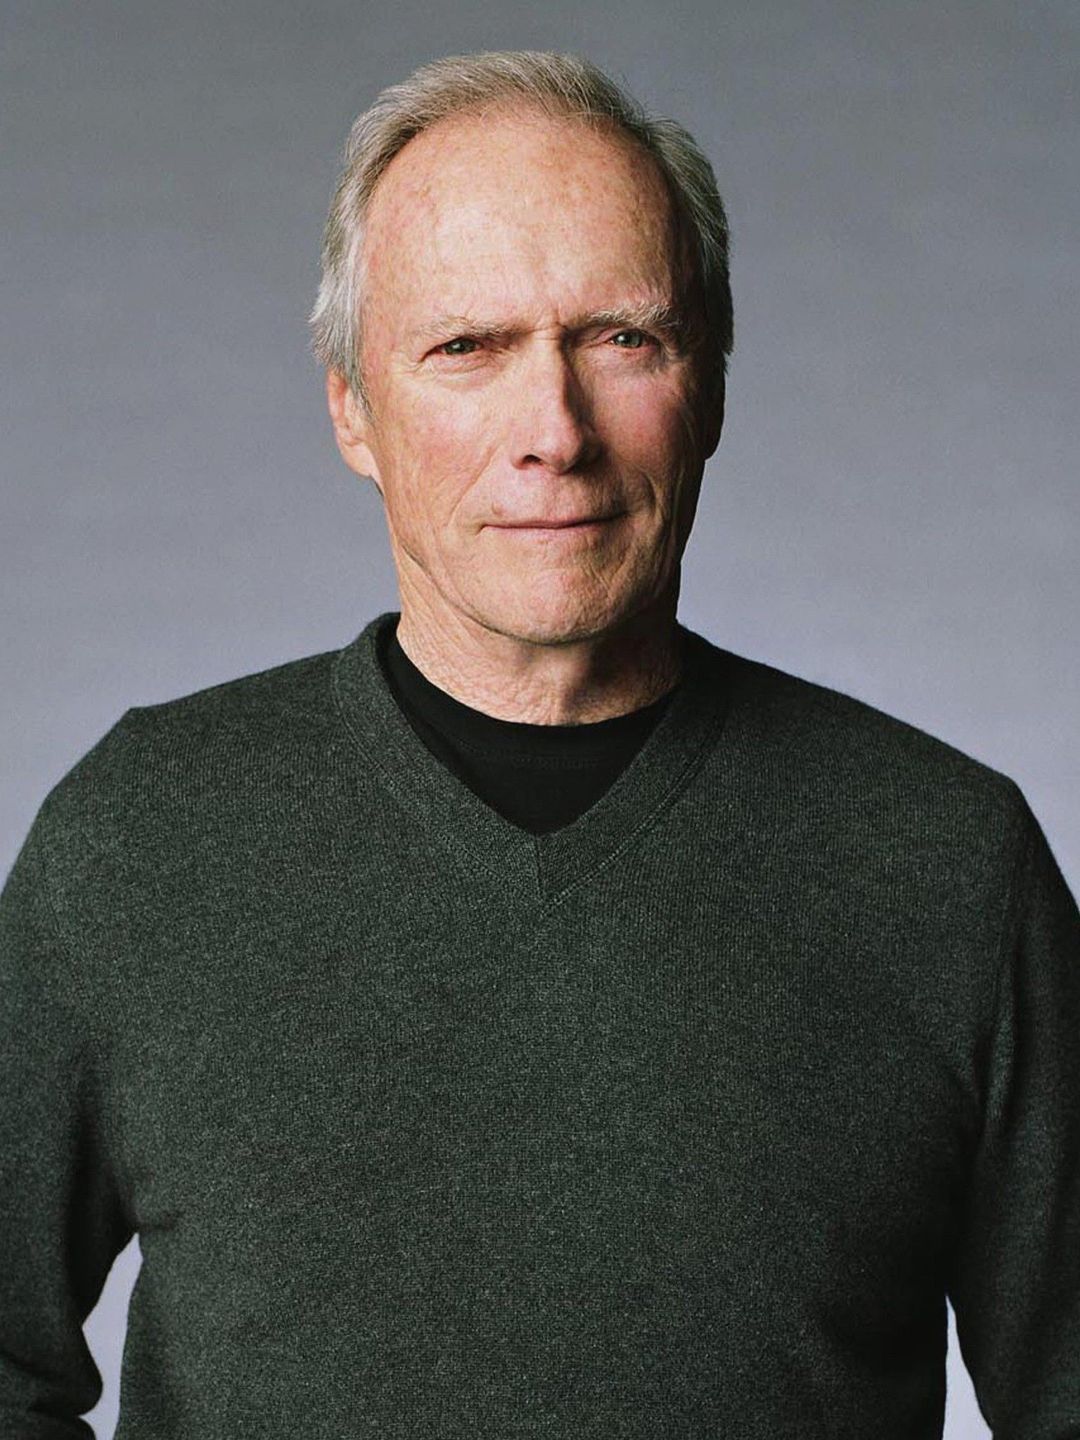 Clint Eastwood who are his parents